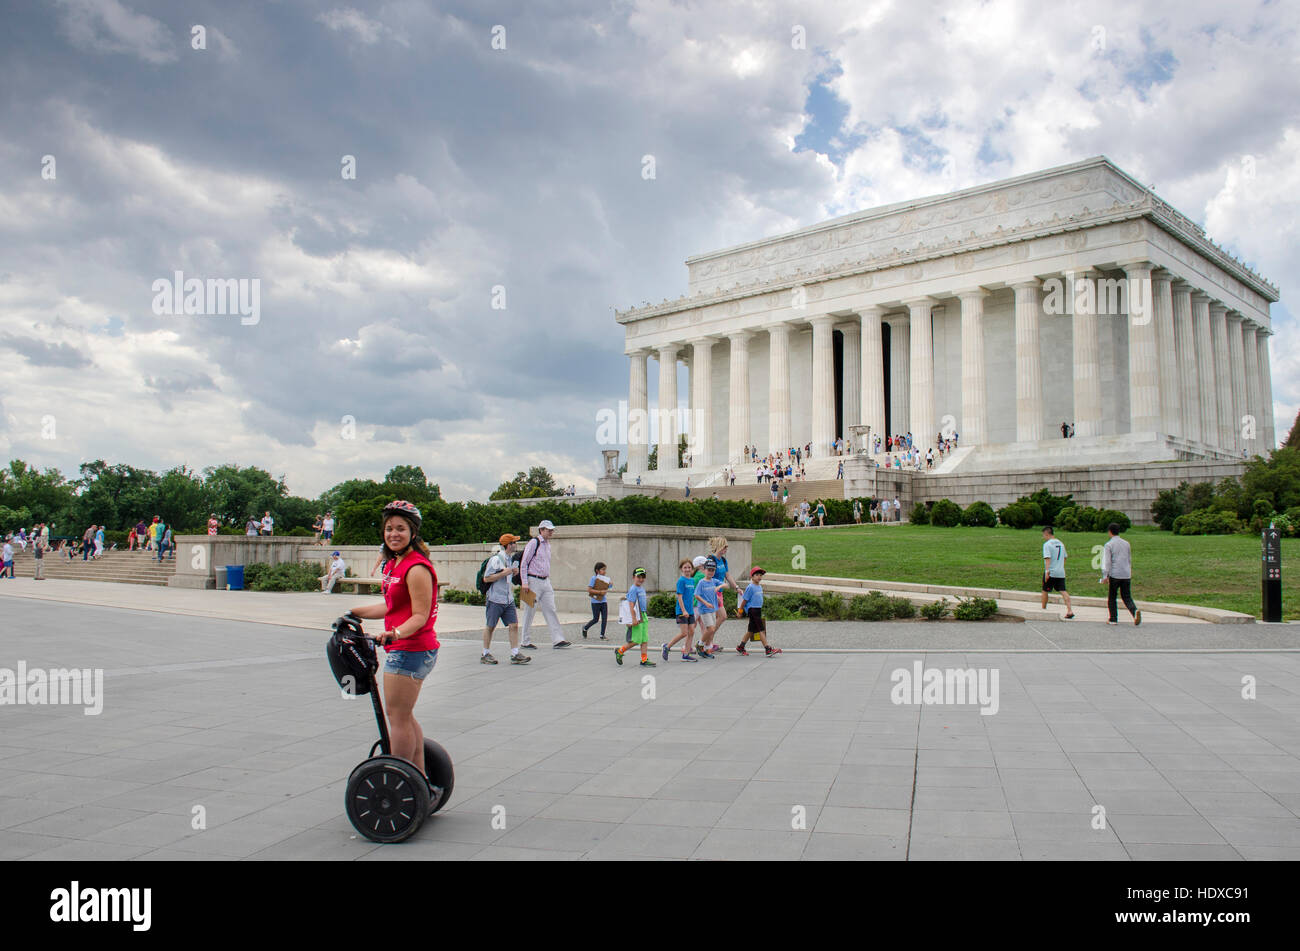 Riding a Segway at the Lincoln Memorial, on the National Mall in Washington, DC. Stock Photo